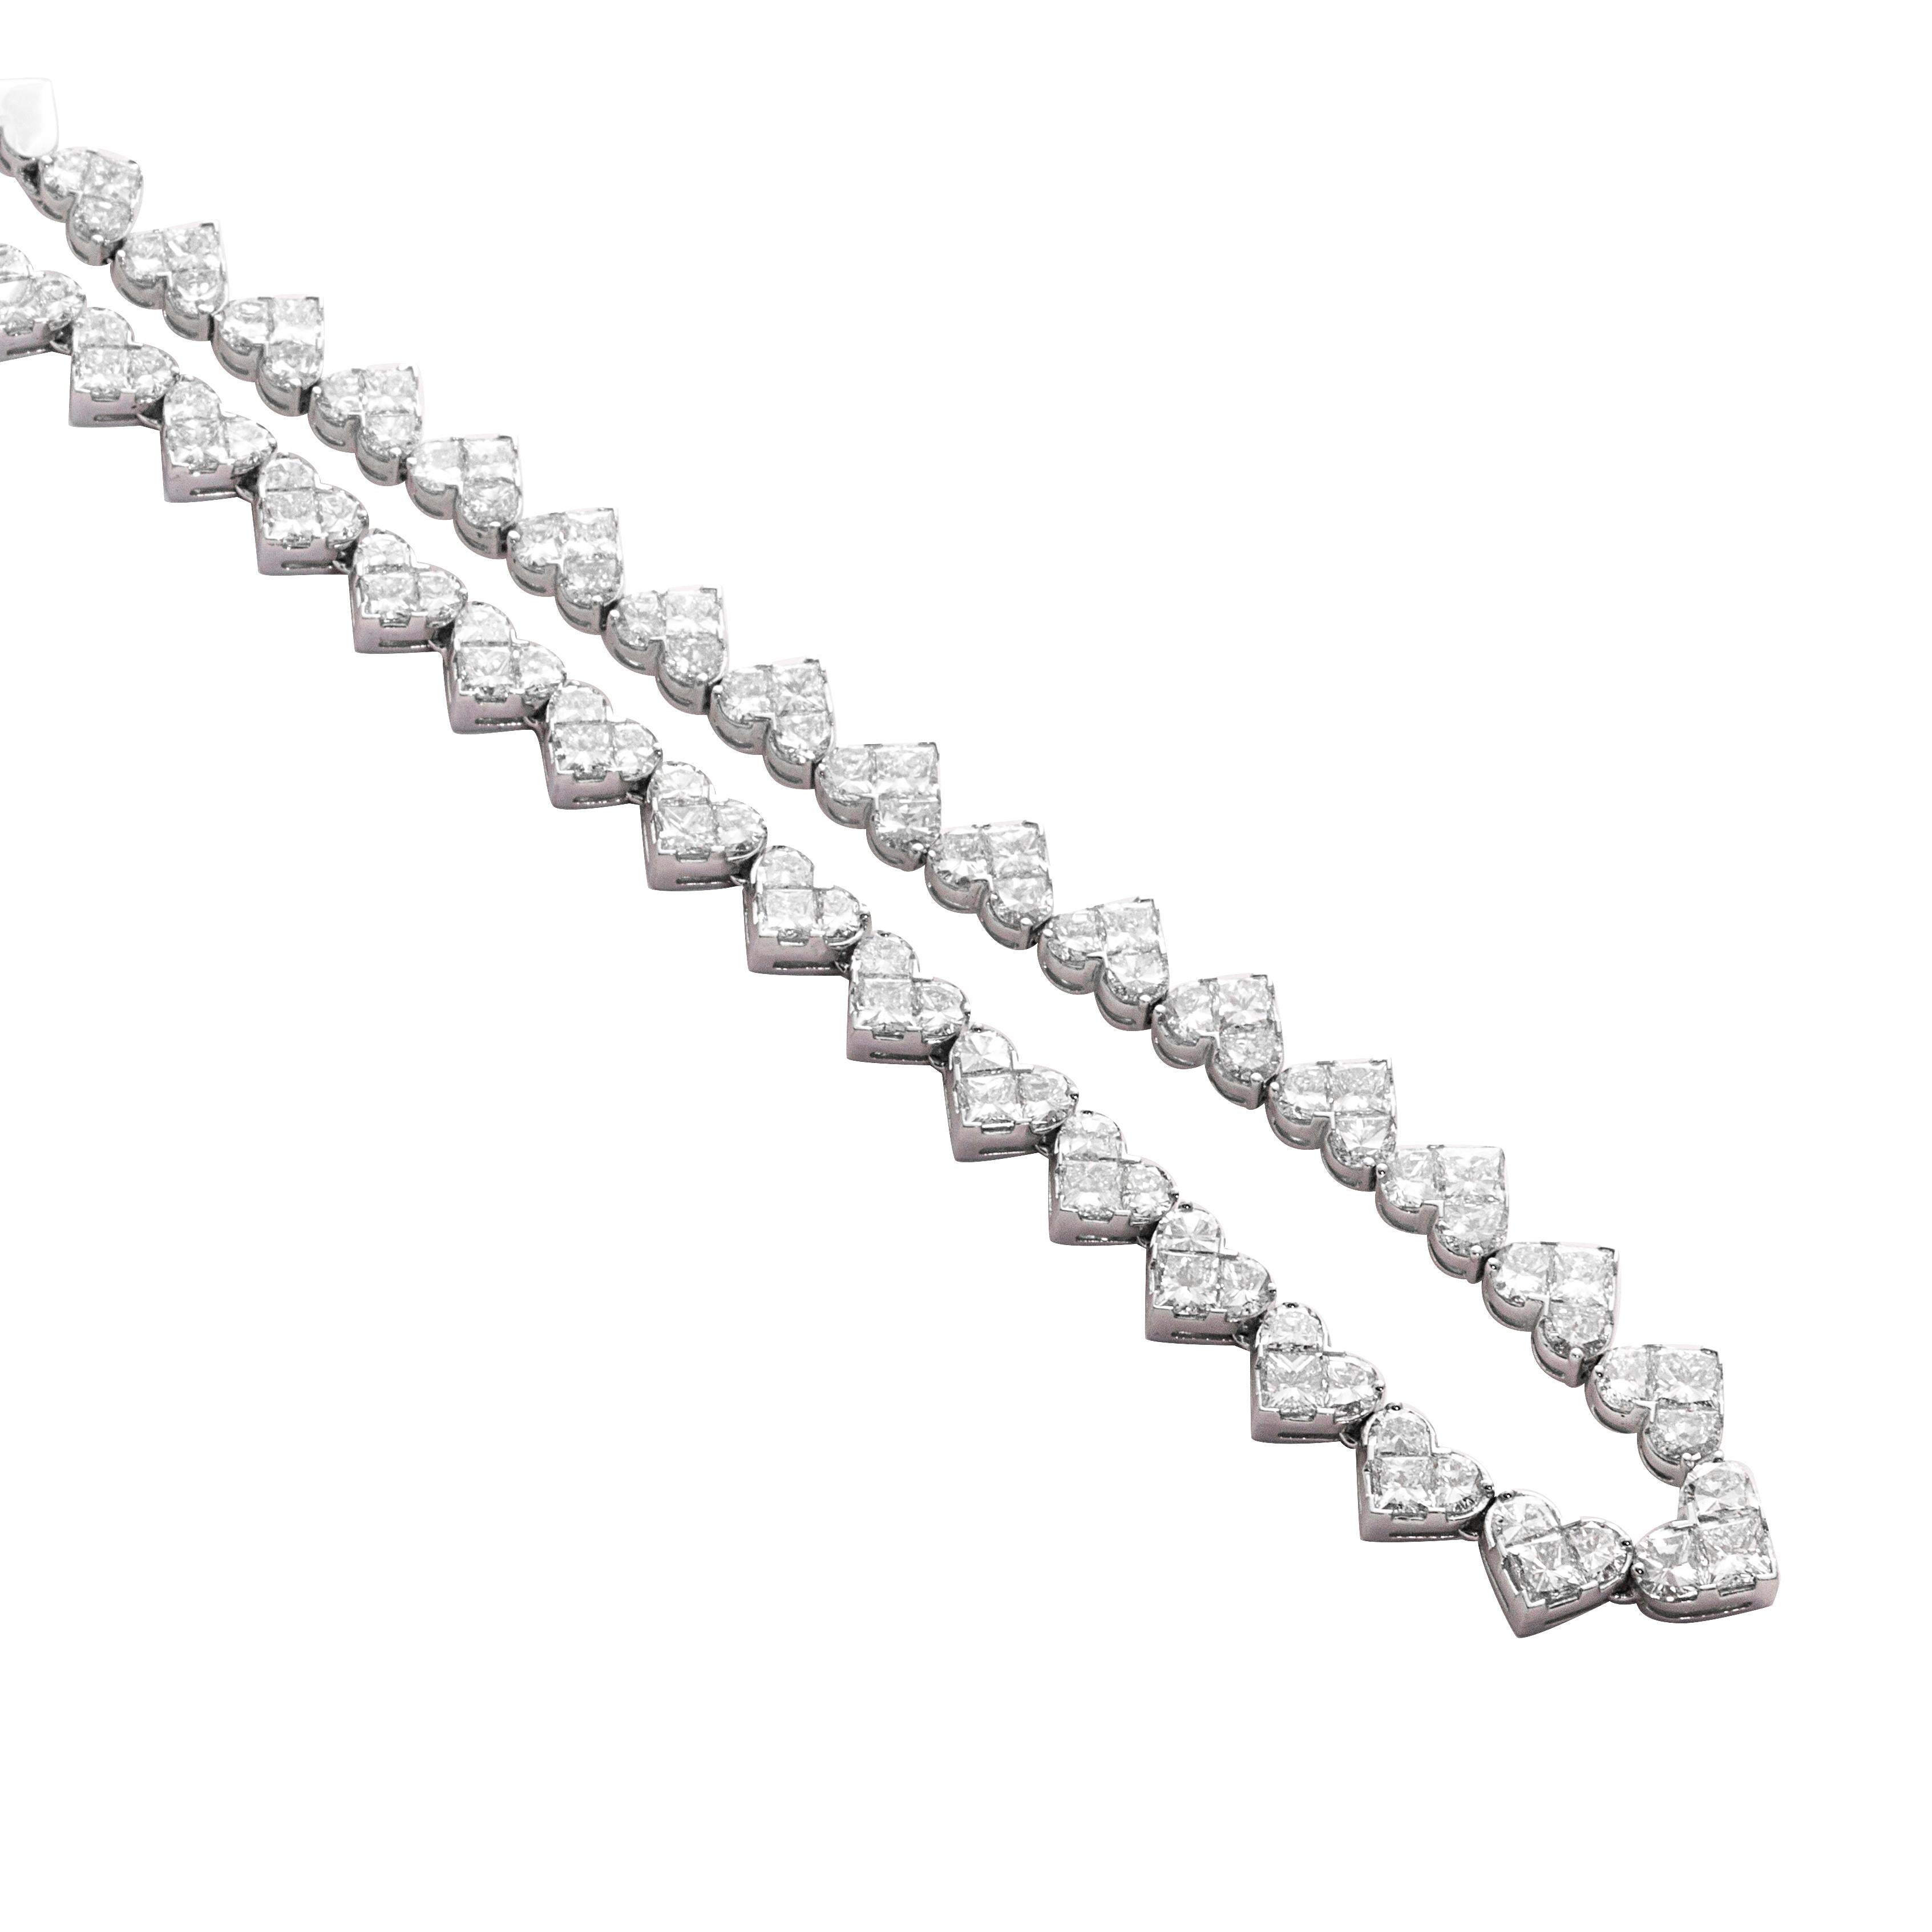 18 Karat White Gold Illusion Setting Diamond Necklace Set

This beautifully crafted diamond necklace set, effortlessly fuses together half moon cut and princess cut diamonds to create an illusion of heart shape solitaires. Diamonds are certified FG